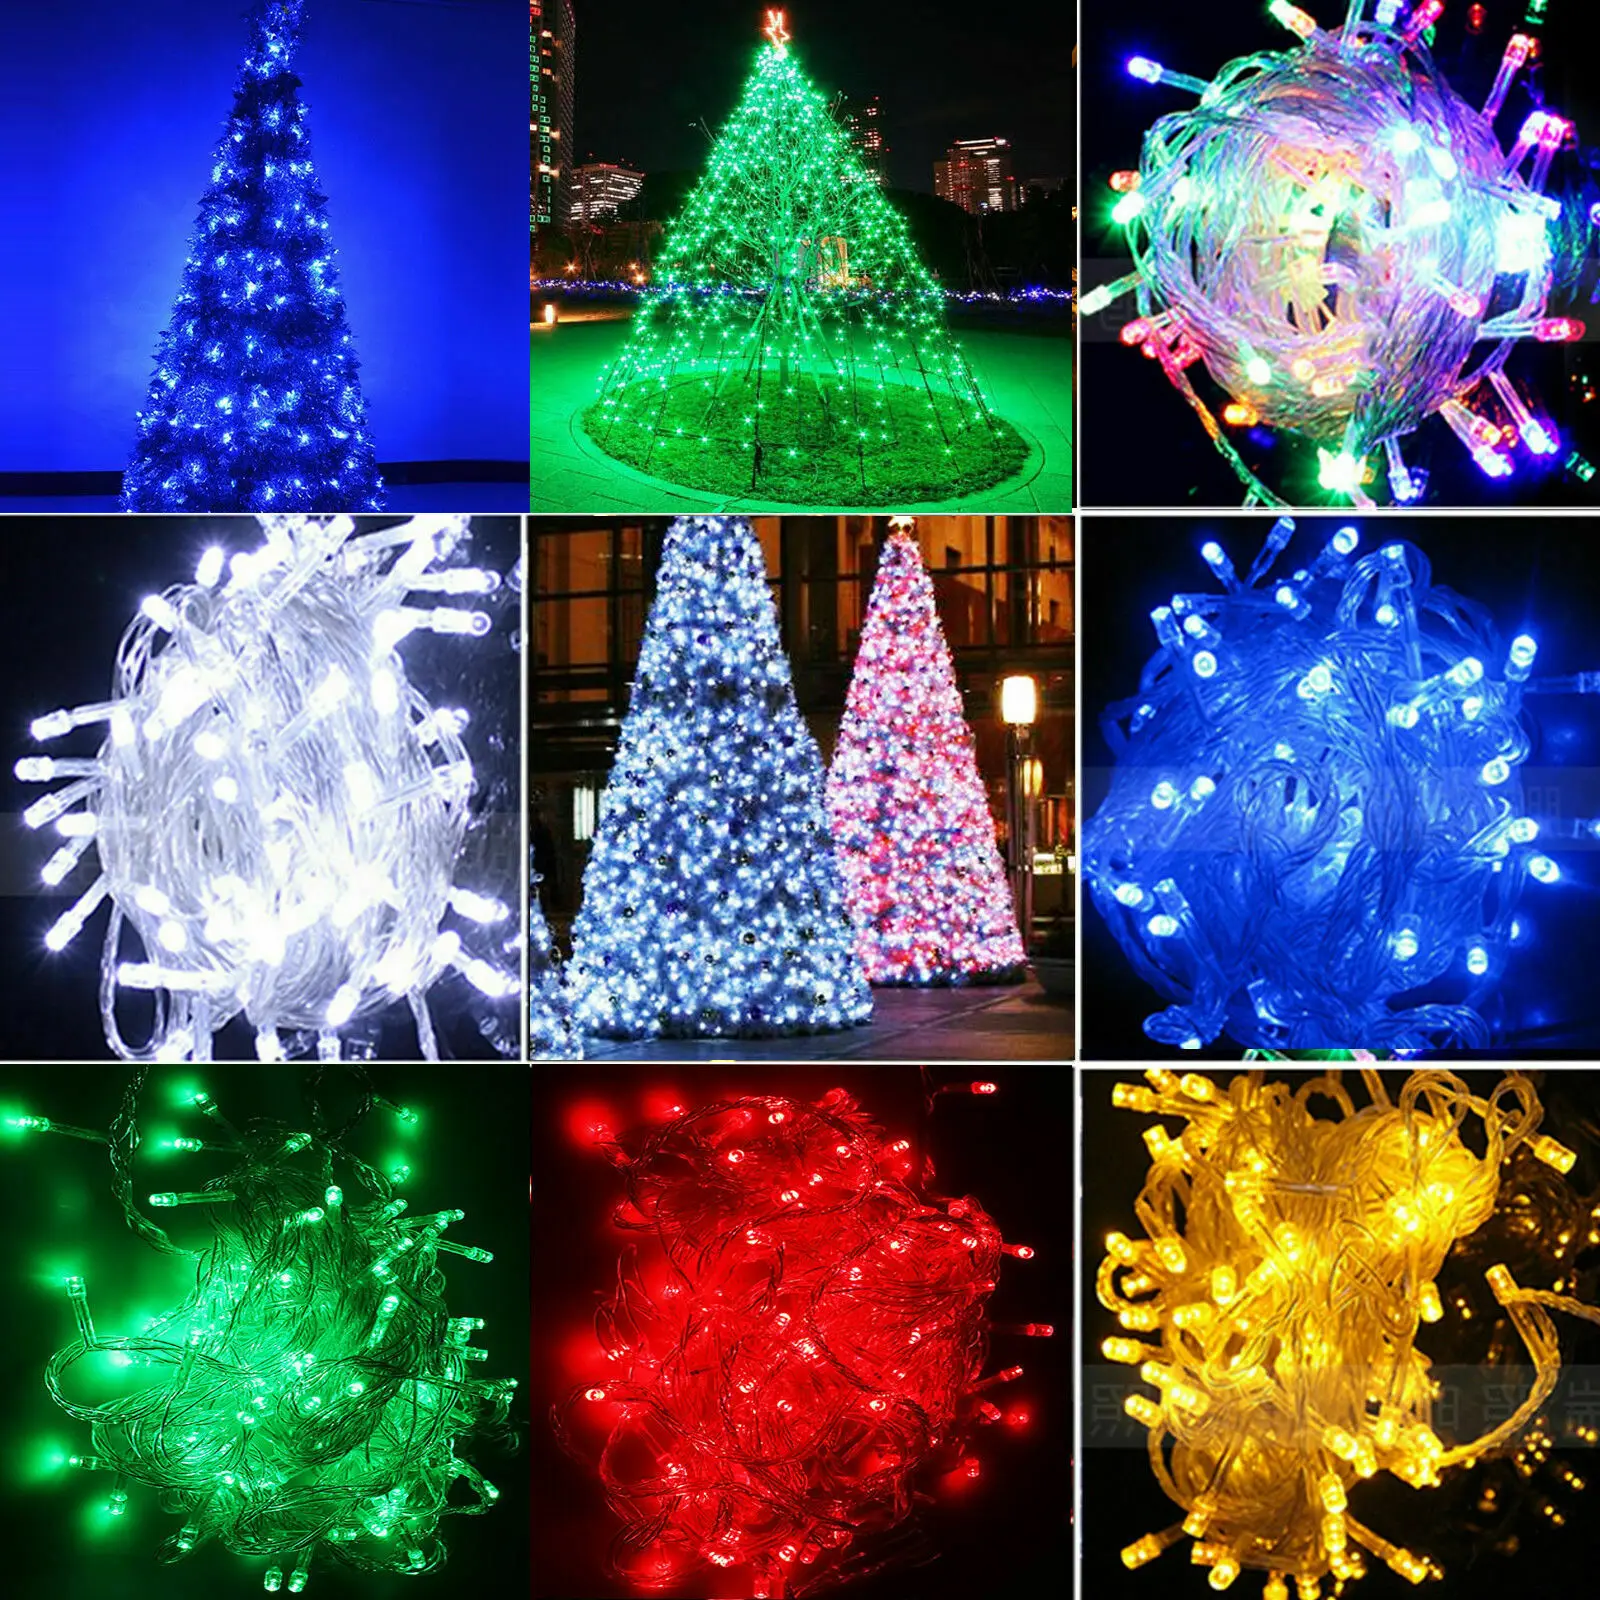 Waterproof 10M 100M LED Christmas Tree String Lights Party Garden Decor Lamp S 